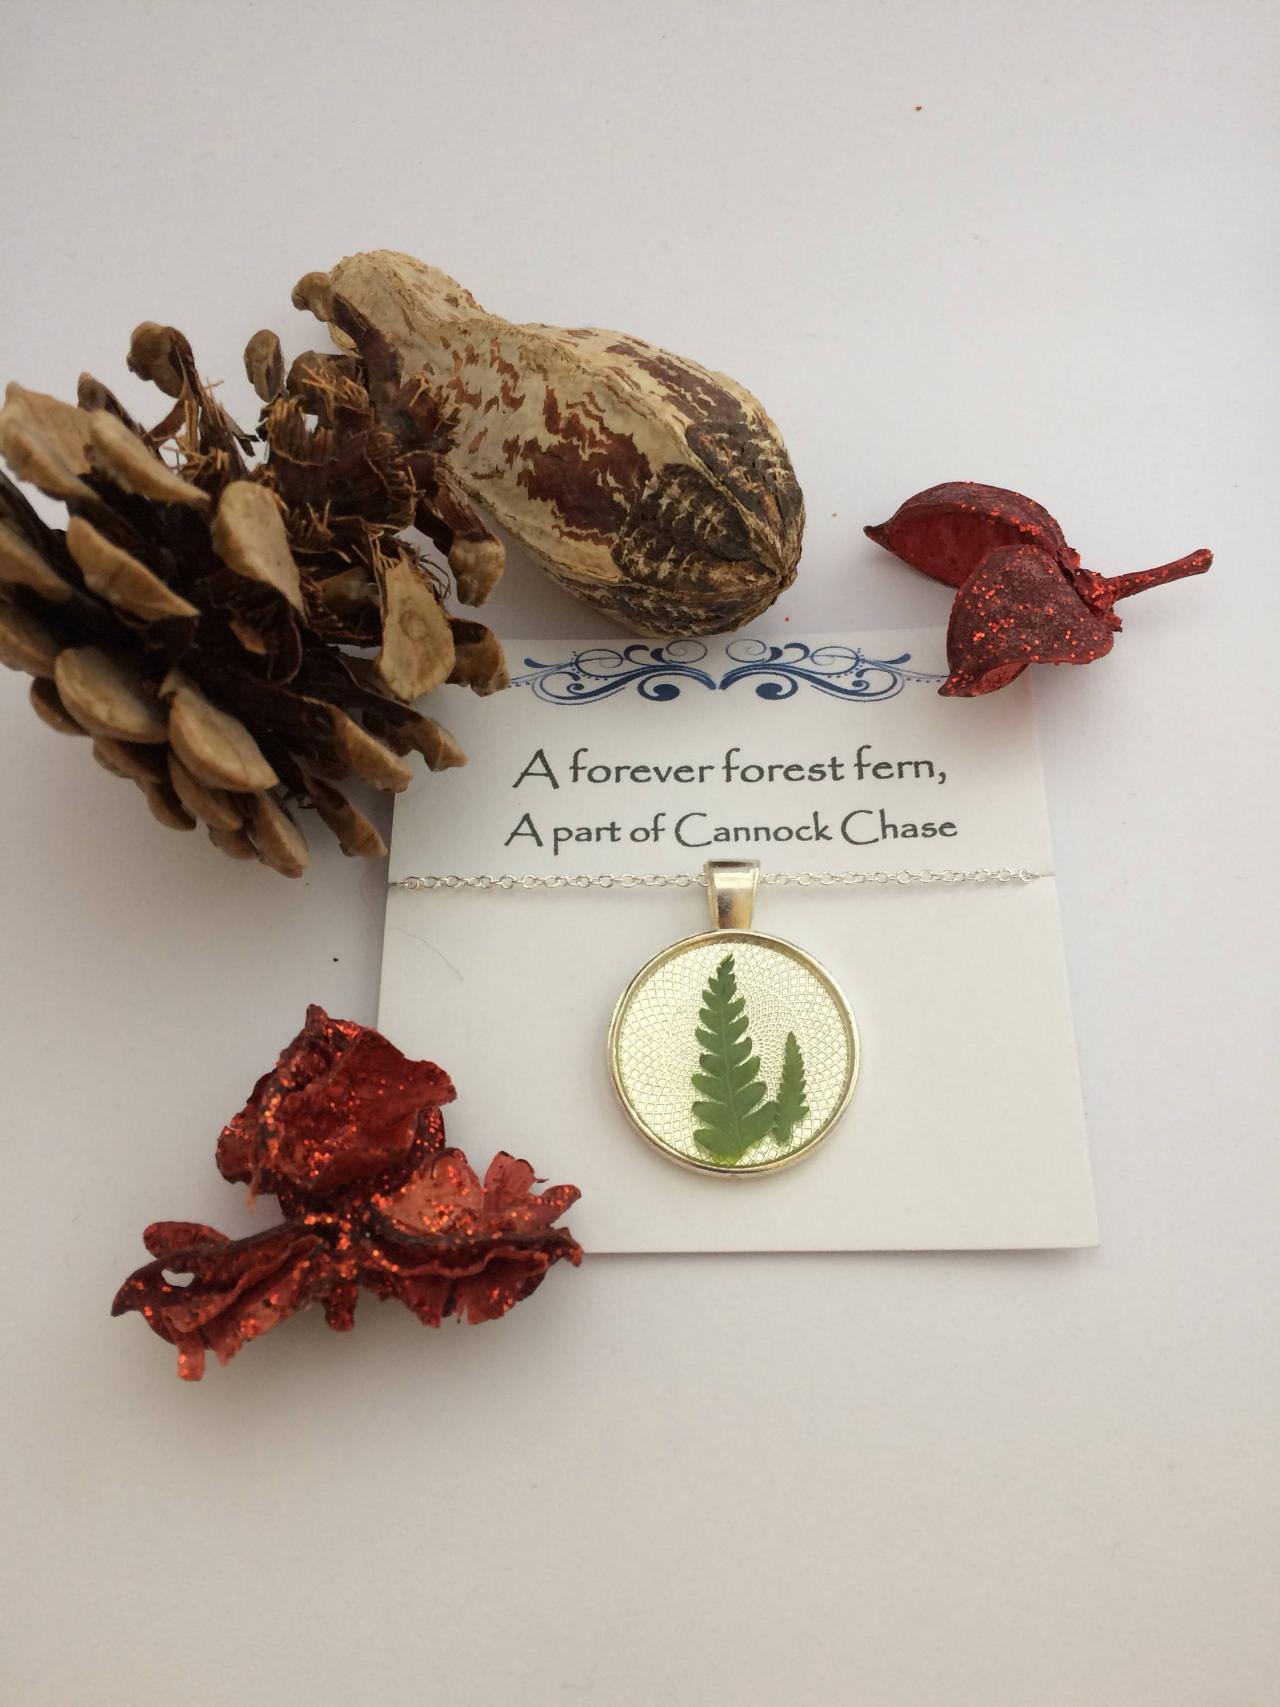 Memories Of Forest Ferns - 'a Forever Forest Fern, A Part Of Cannock Chase - Memory Necklace